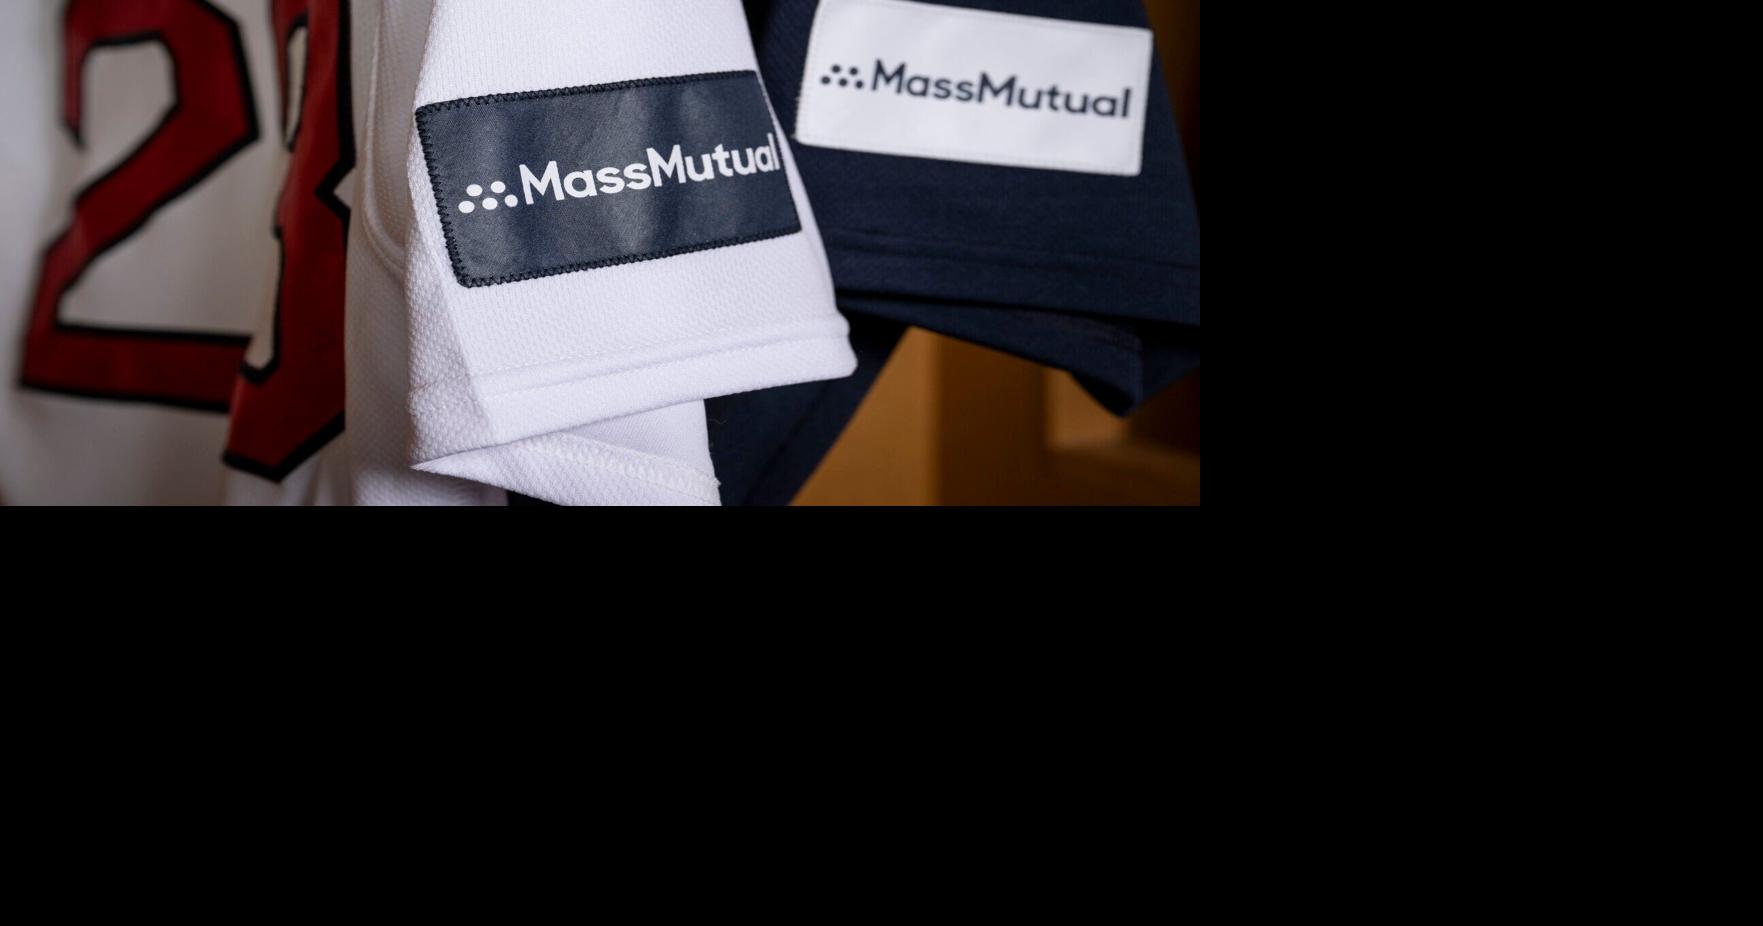 Boston Red Sox and Springfield-based life insurer, MassMutual partner up